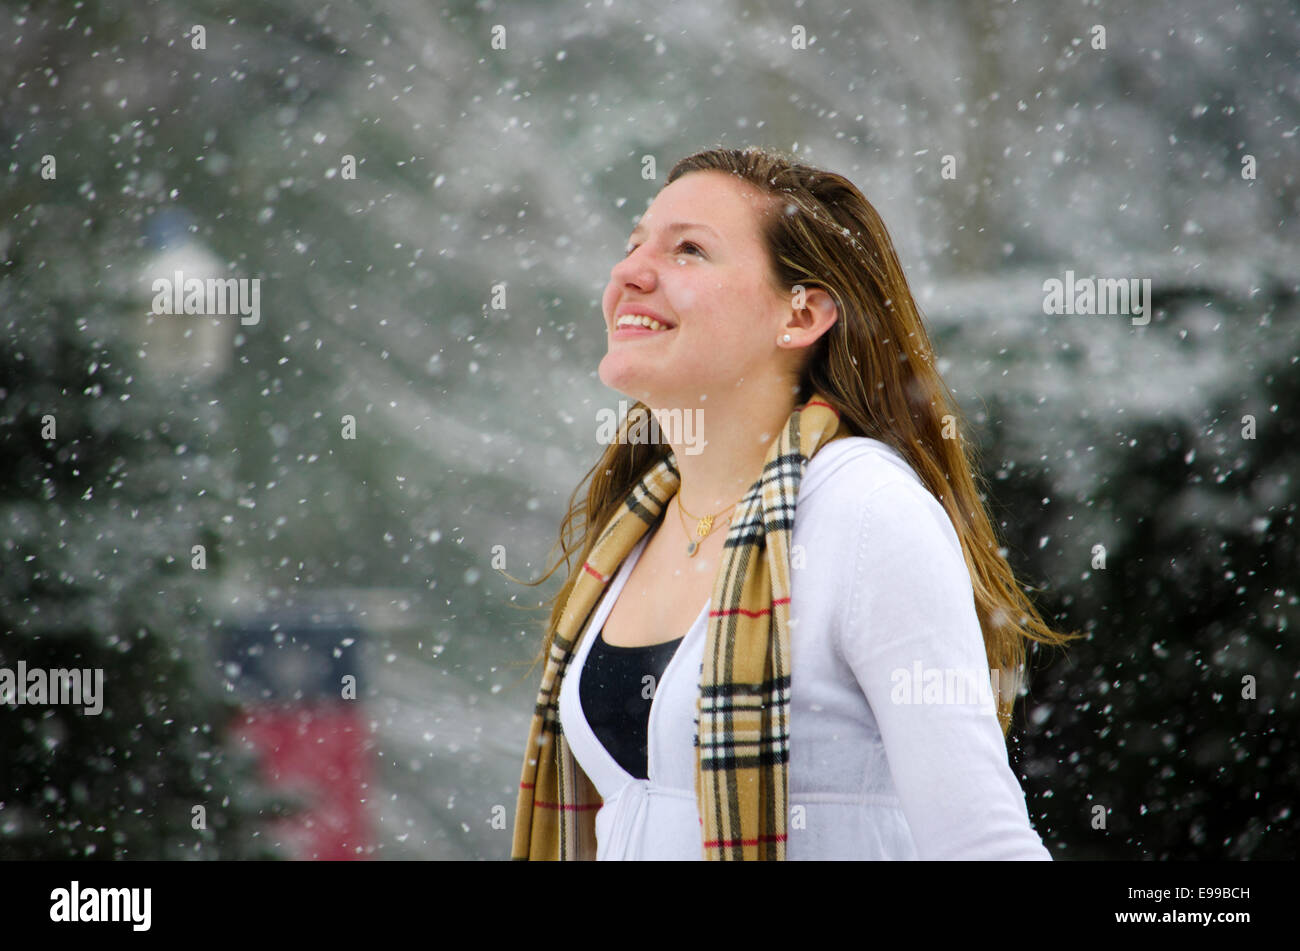 Let it Snow: A young woman raises her head up towards a beautiful Snow Shower. Stock Photo